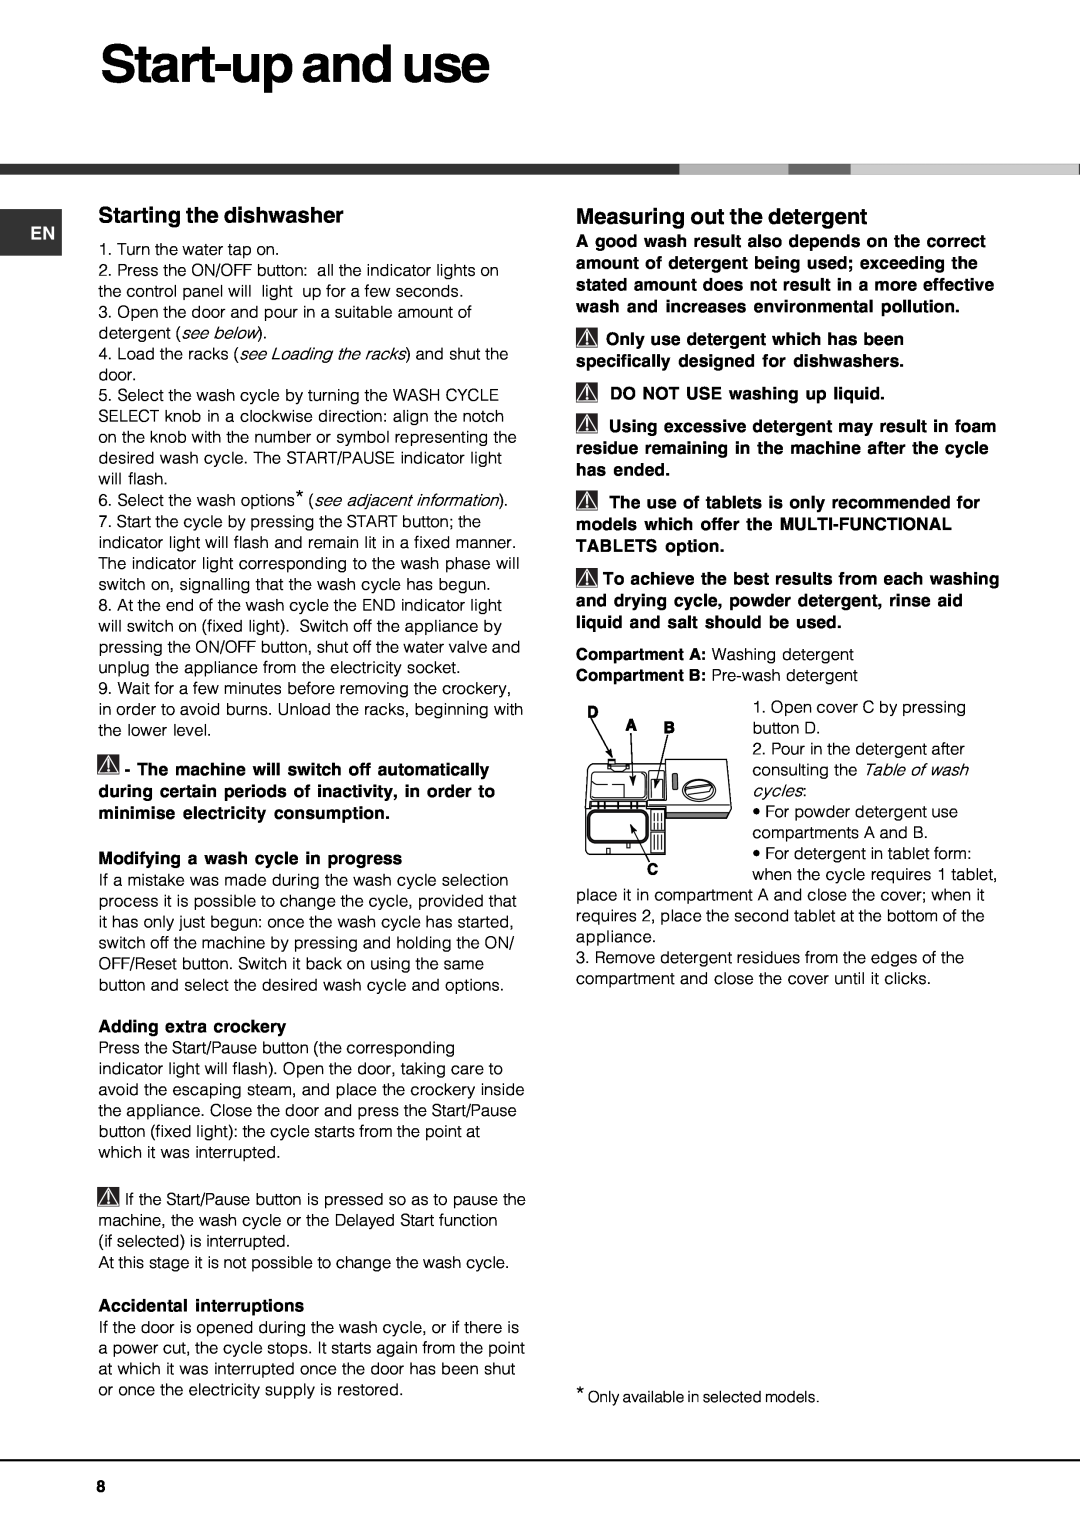 Hotpoint FDM550PR manual Start-upand use, Starting the dishwasher, Measuring out the detergent 